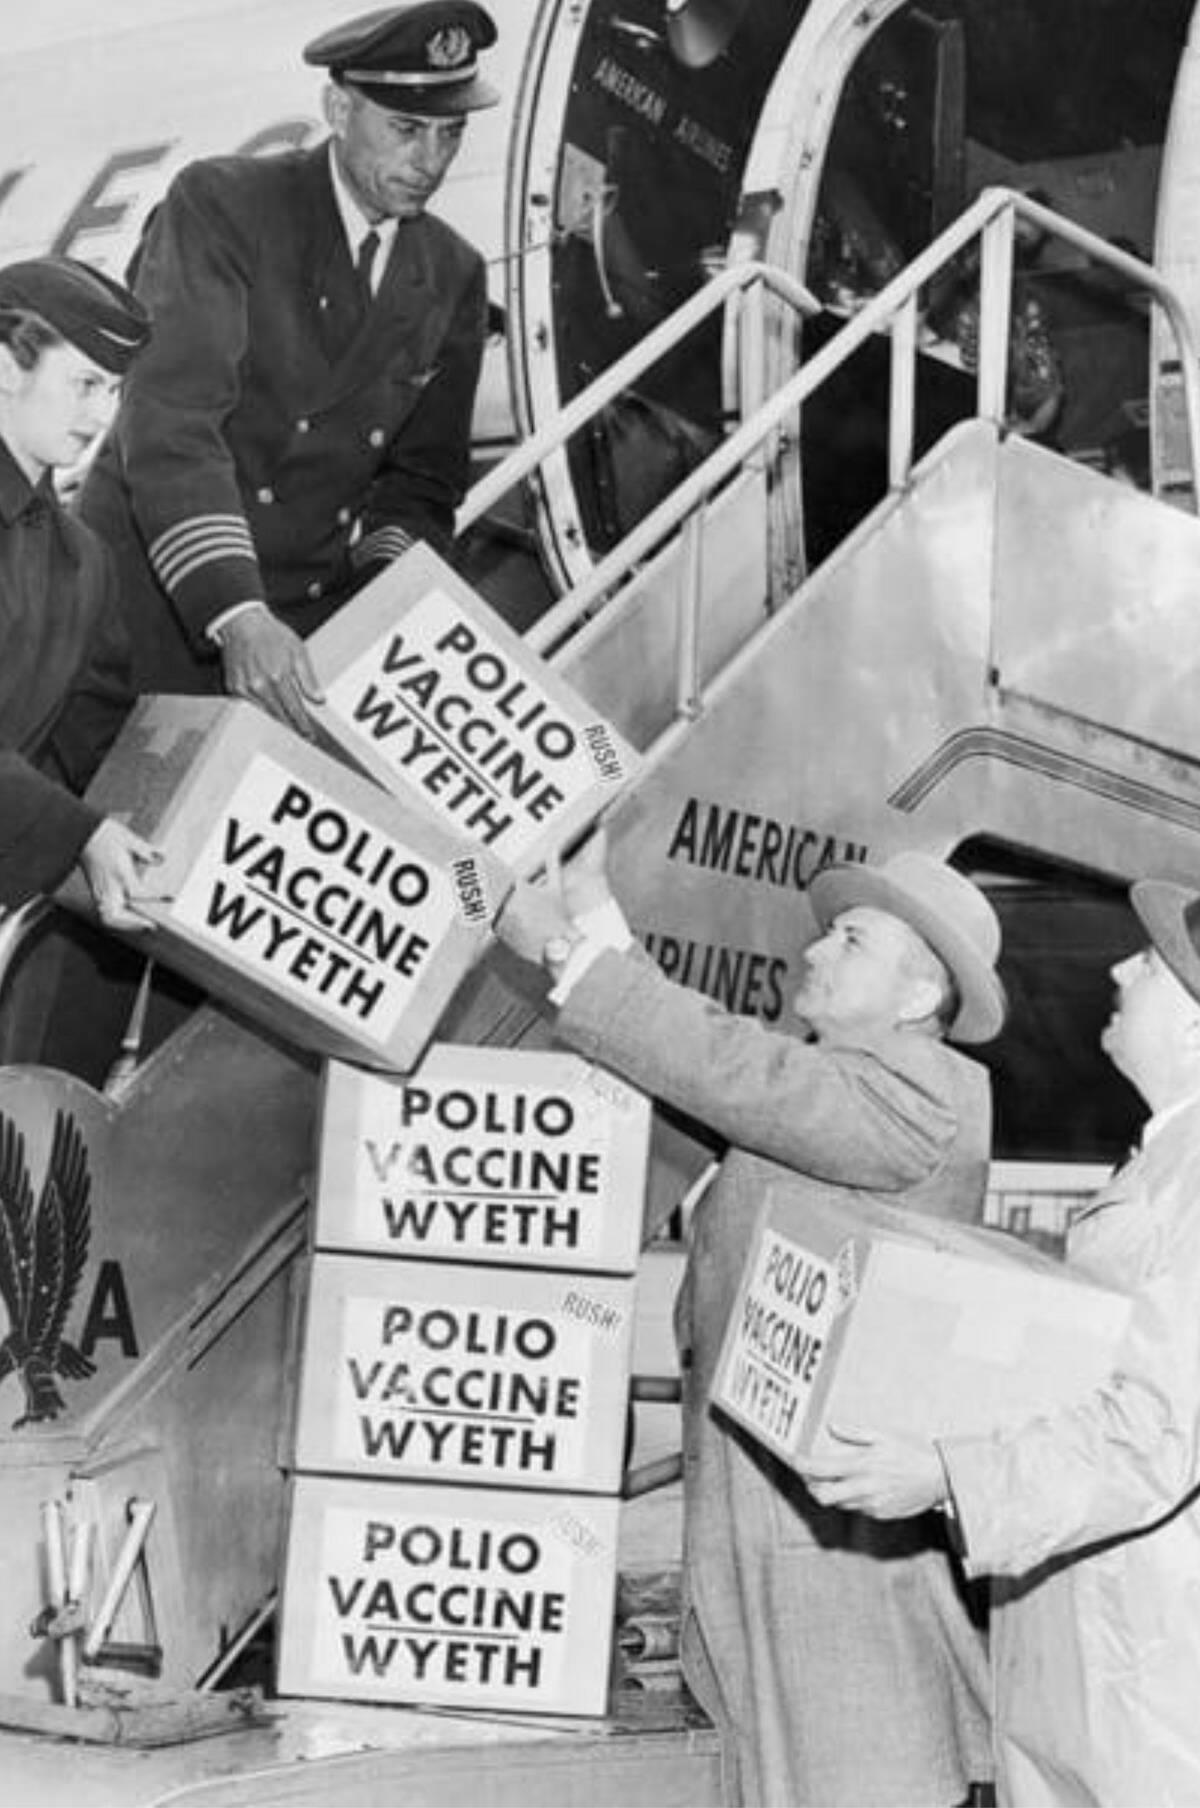 <p>After a year of trials, Dr. Jonas Salk finally found a polio vaccine that was effective. Just minutes after he shared the news, the vaccines were urgently onboarded to an American Airlines plane for distribution.</p> <p>Flight attendant Dora Kline, pictured here, helped with this effort in 1955, which became an important moment in history. Imagine being able to play a role in saving lives while doing your job. This also showed the airlines' faith in their flight attendants, entrusting them with important tasks.</p>